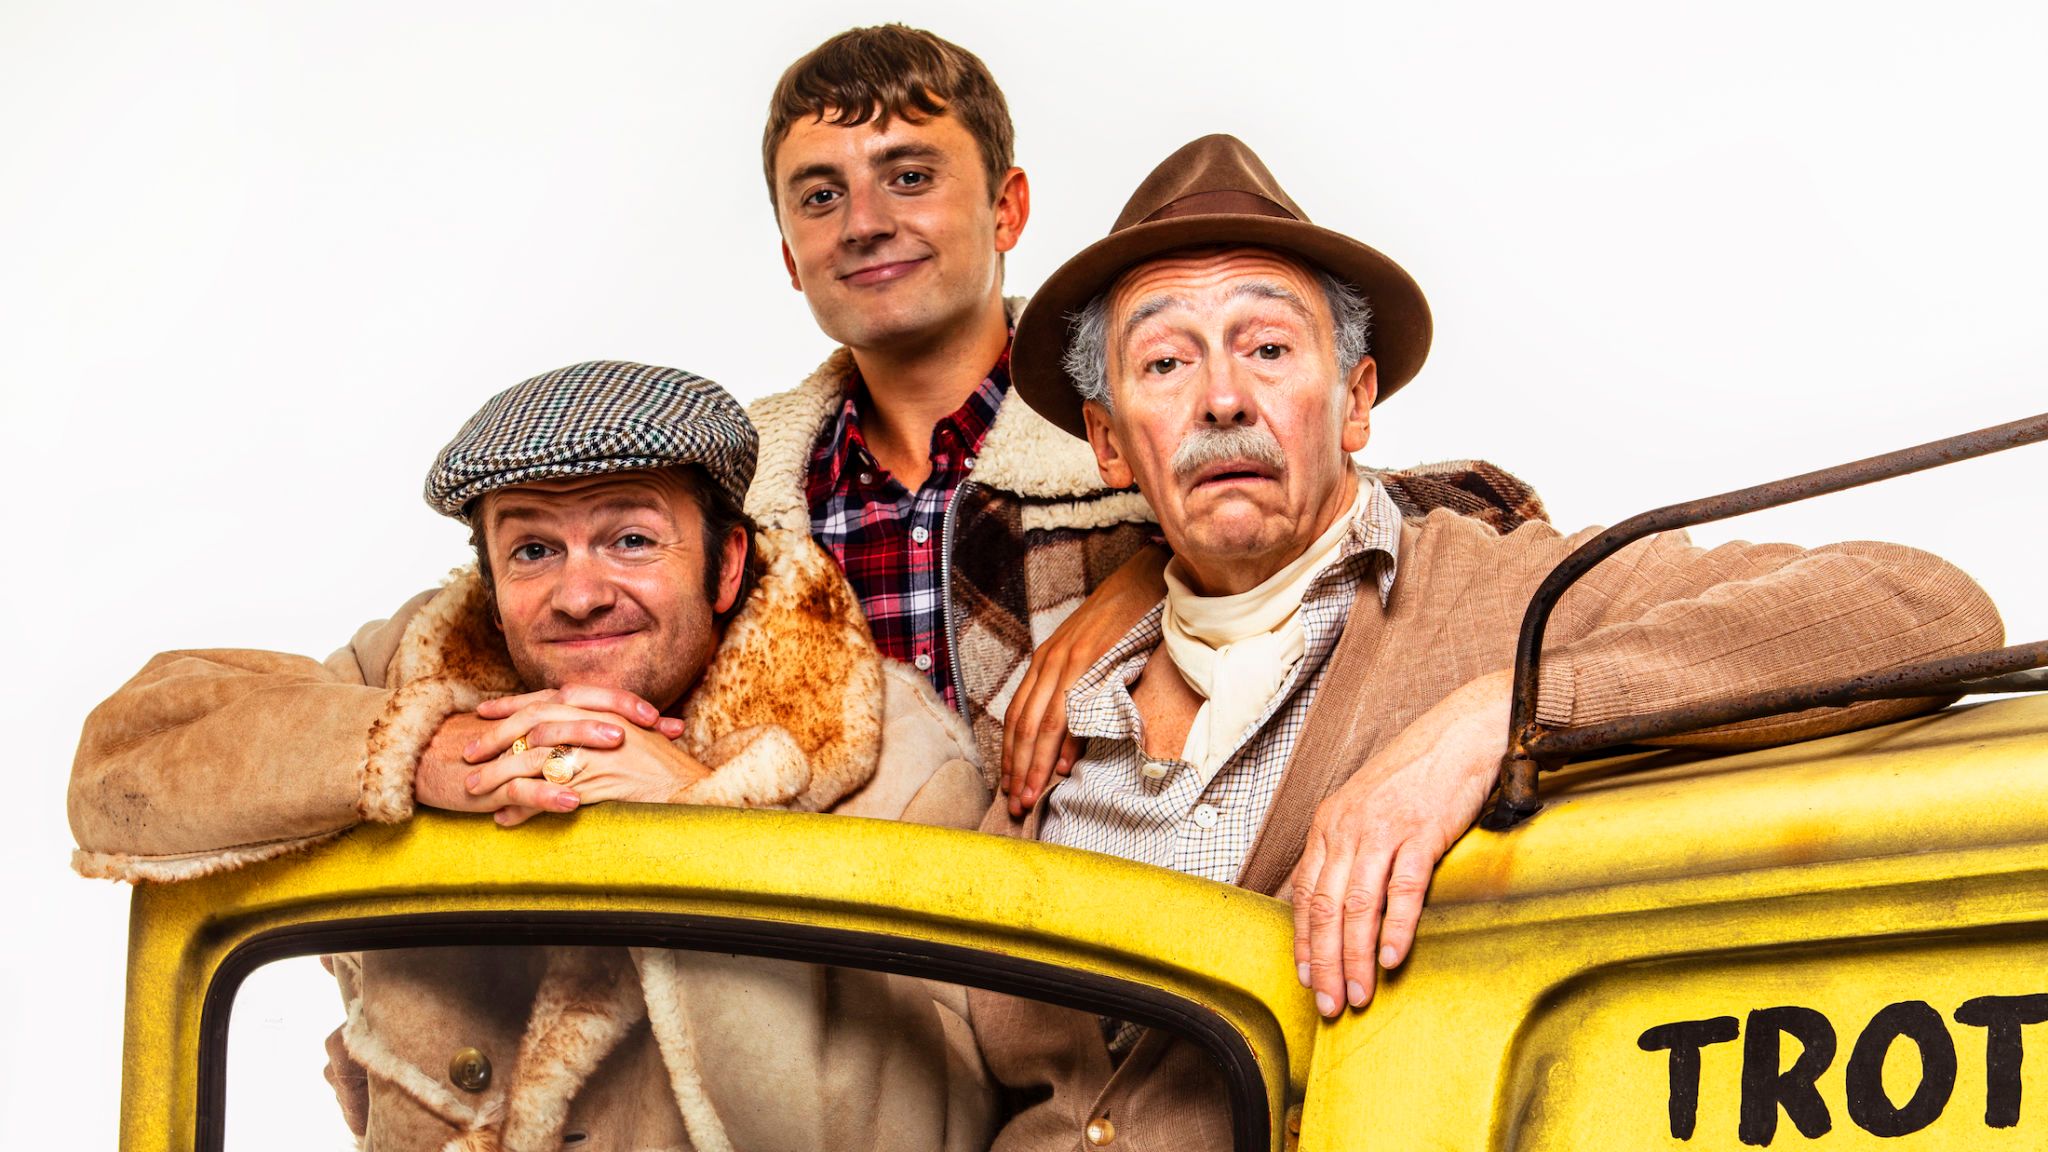 Tom Bennett, Ryan Hutton And Paul Whitehouse As Del - Only Fools And Horses The Musical - HD Wallpaper 